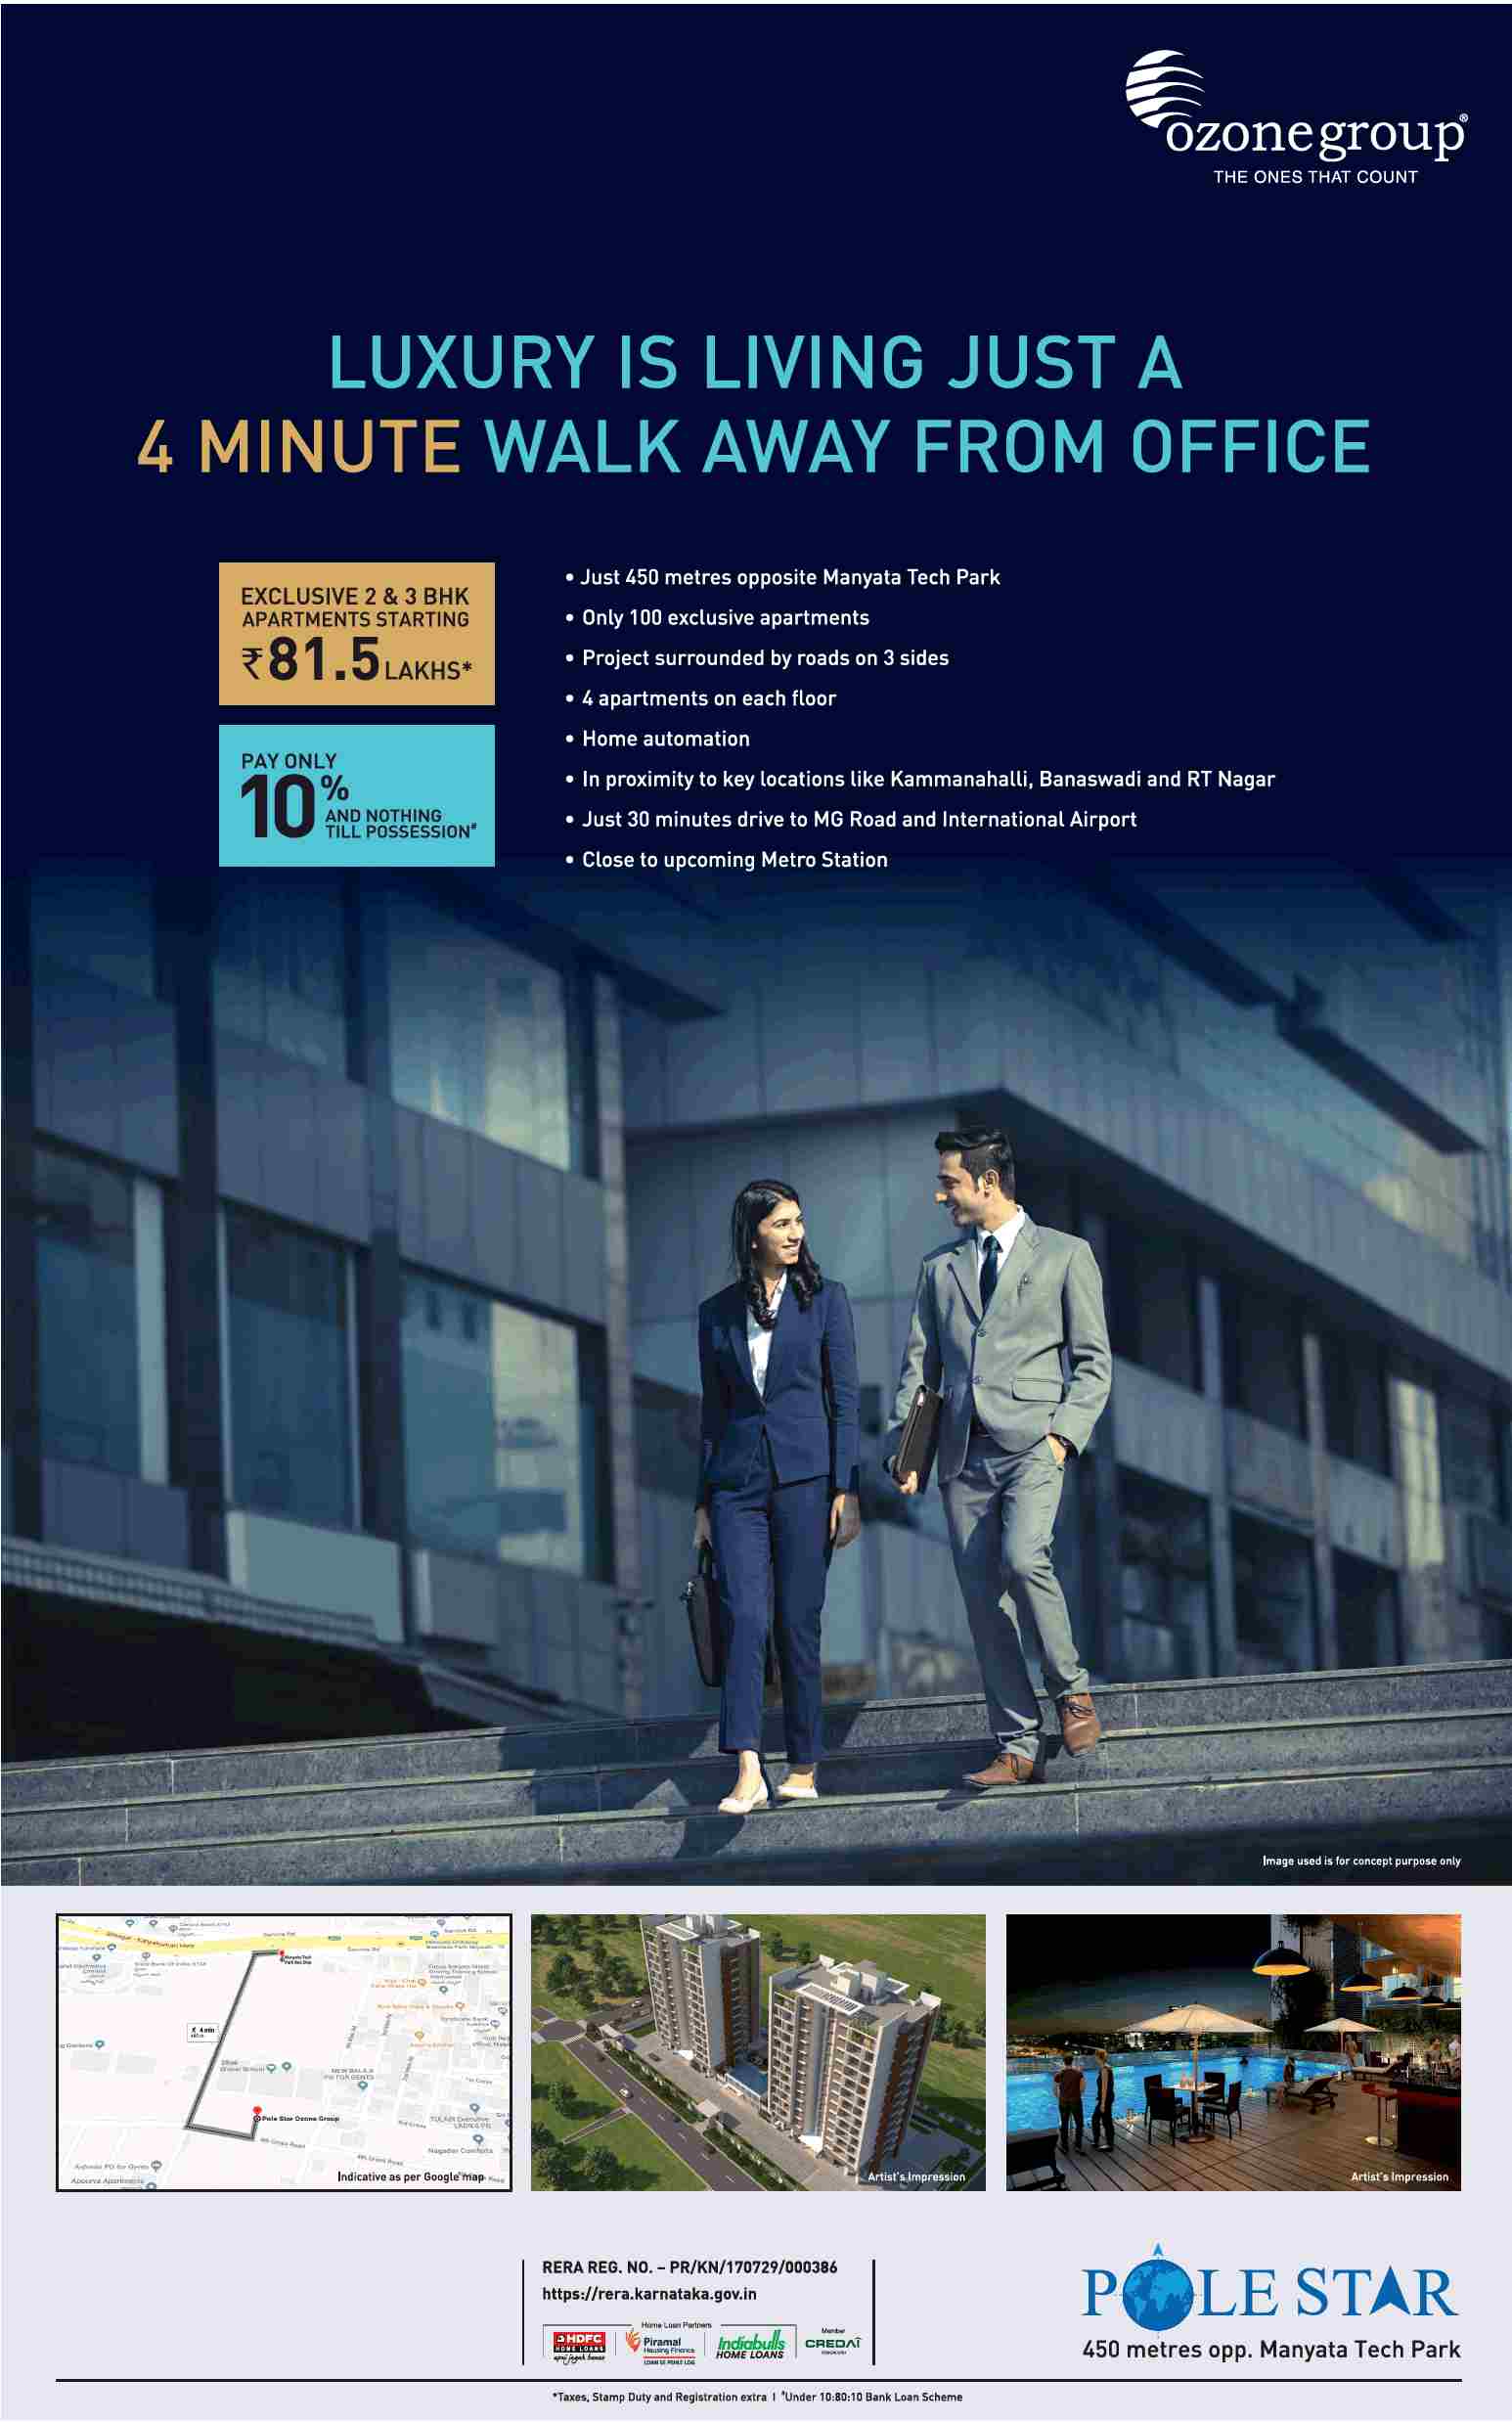 Book exclusive 2 & 3 BHK apartment starting at Rs. 81.5 Lakhs at Ozone Pole Star in Bangalore Update